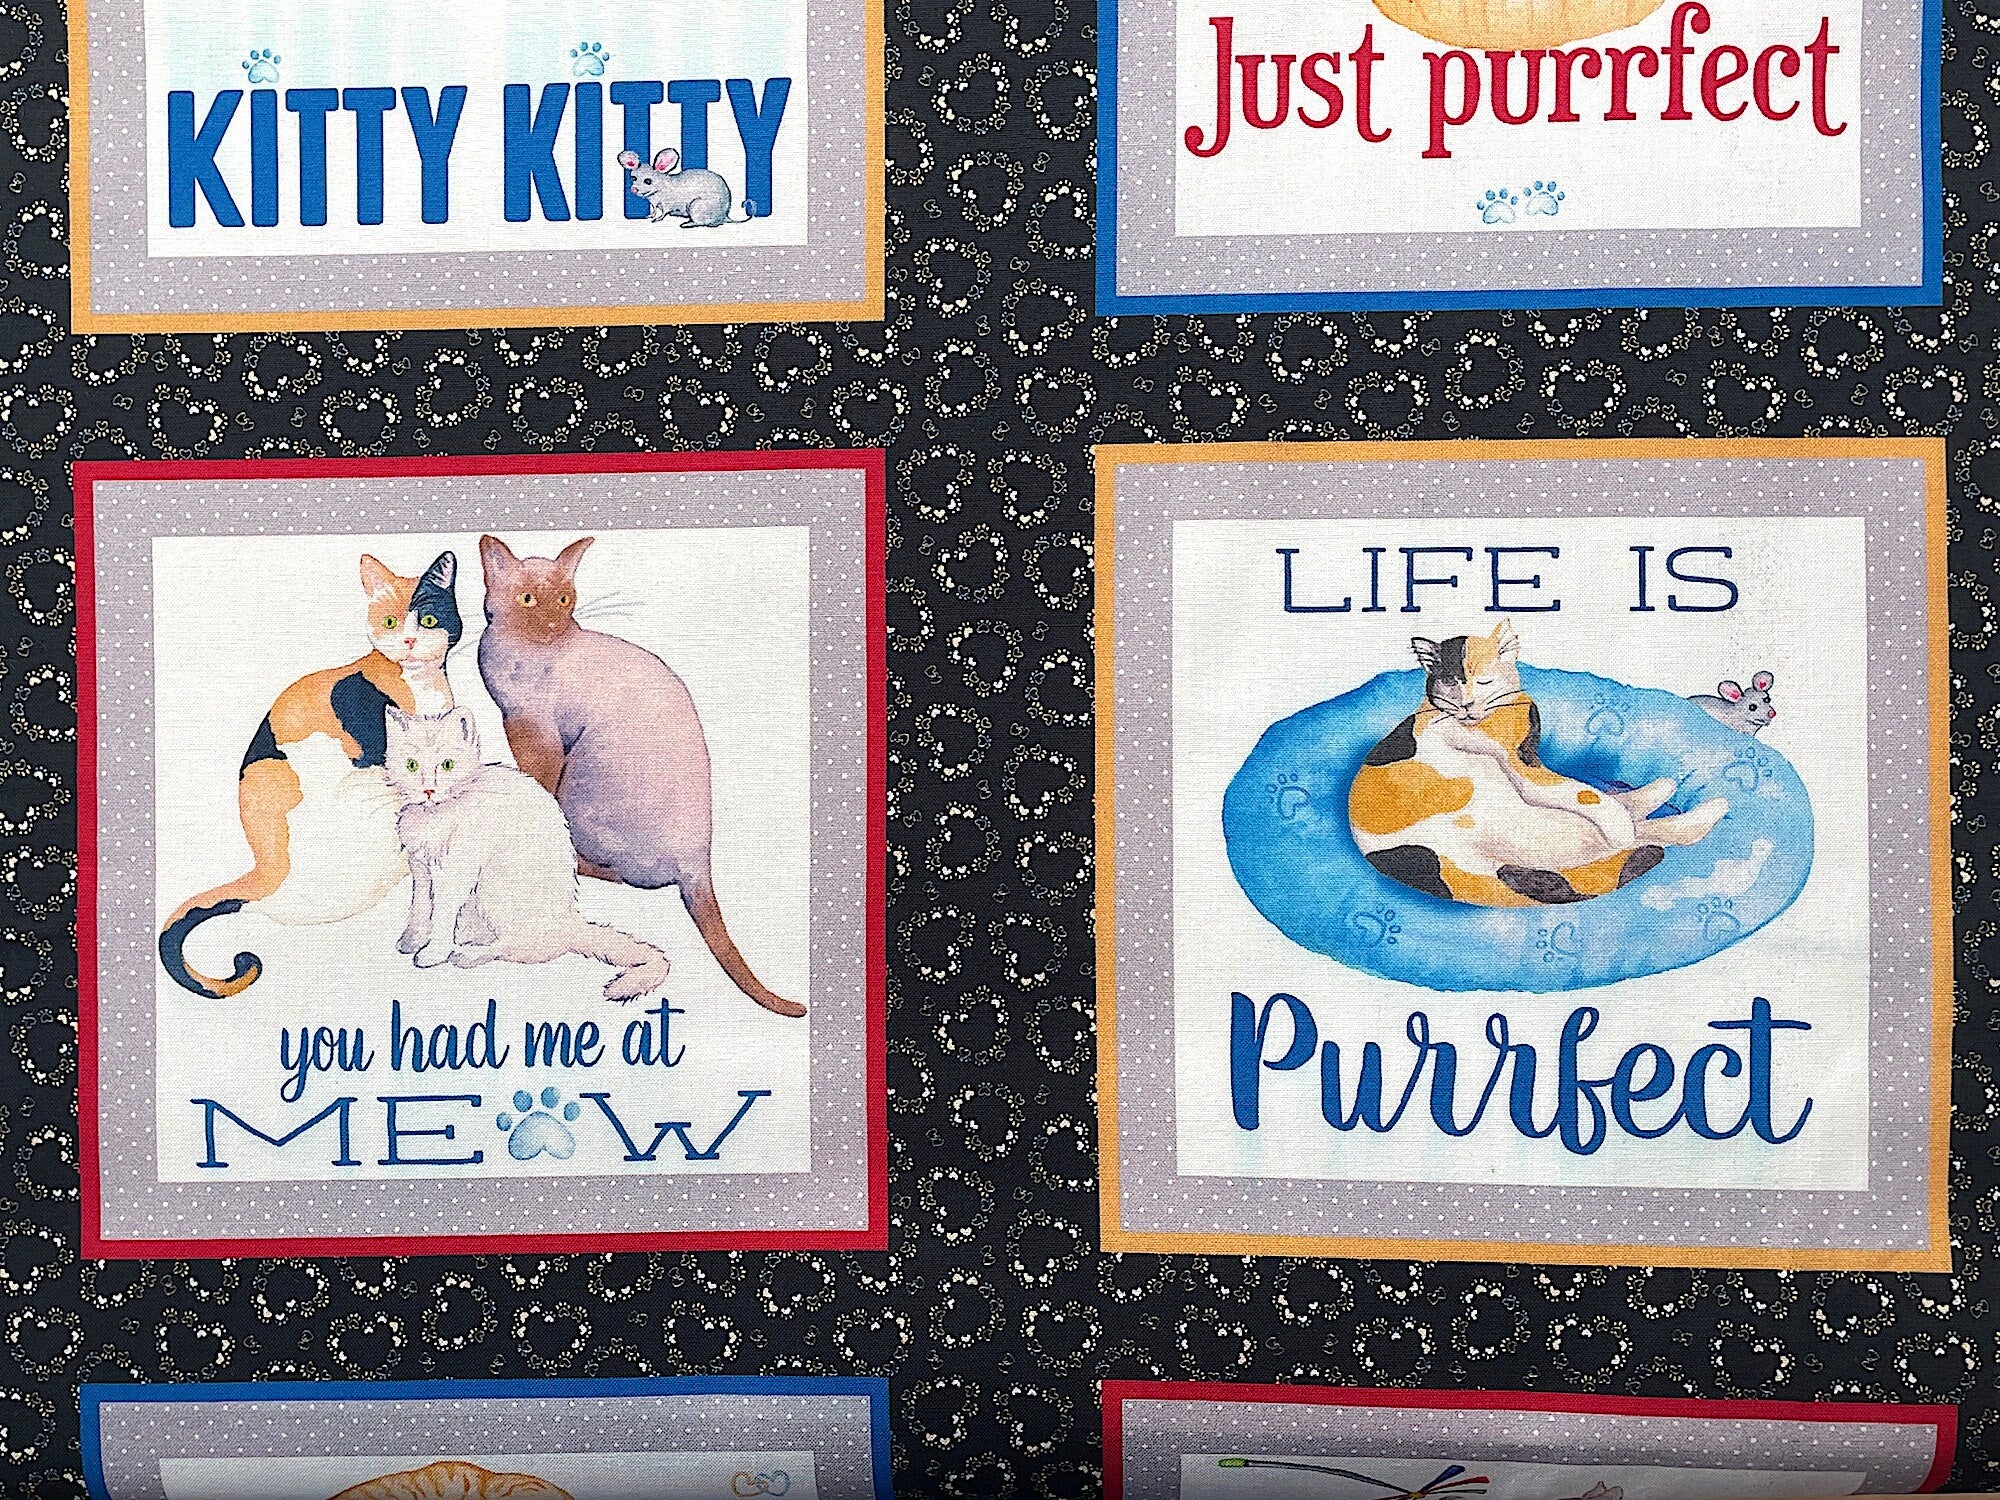 Close up of a cat square that says Life is purrfect and there is a cat in a cat bed.